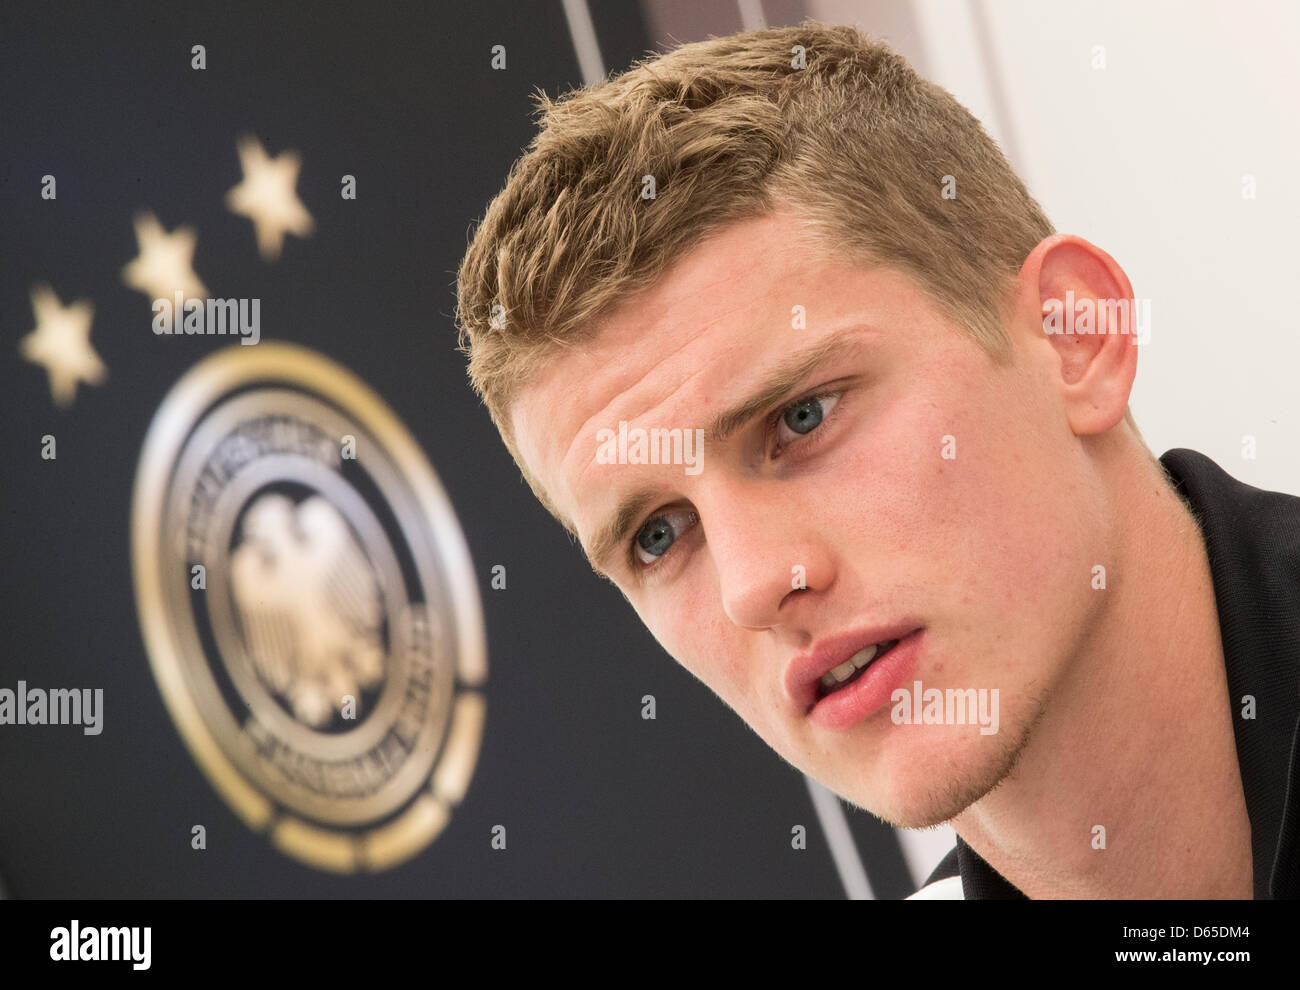 Germany's Lars Bender attends a press conference of the German national soccer team in Gdansk, Poland, 18 June 2012. The UEFA EURO 2012 takes place from 08 June to 01 July 2012 and is co-hosted by Poland and Ukraine. Photo: Jens Wolf dpa  +++(c) dpa - Bildfunk+++ Stock Photo